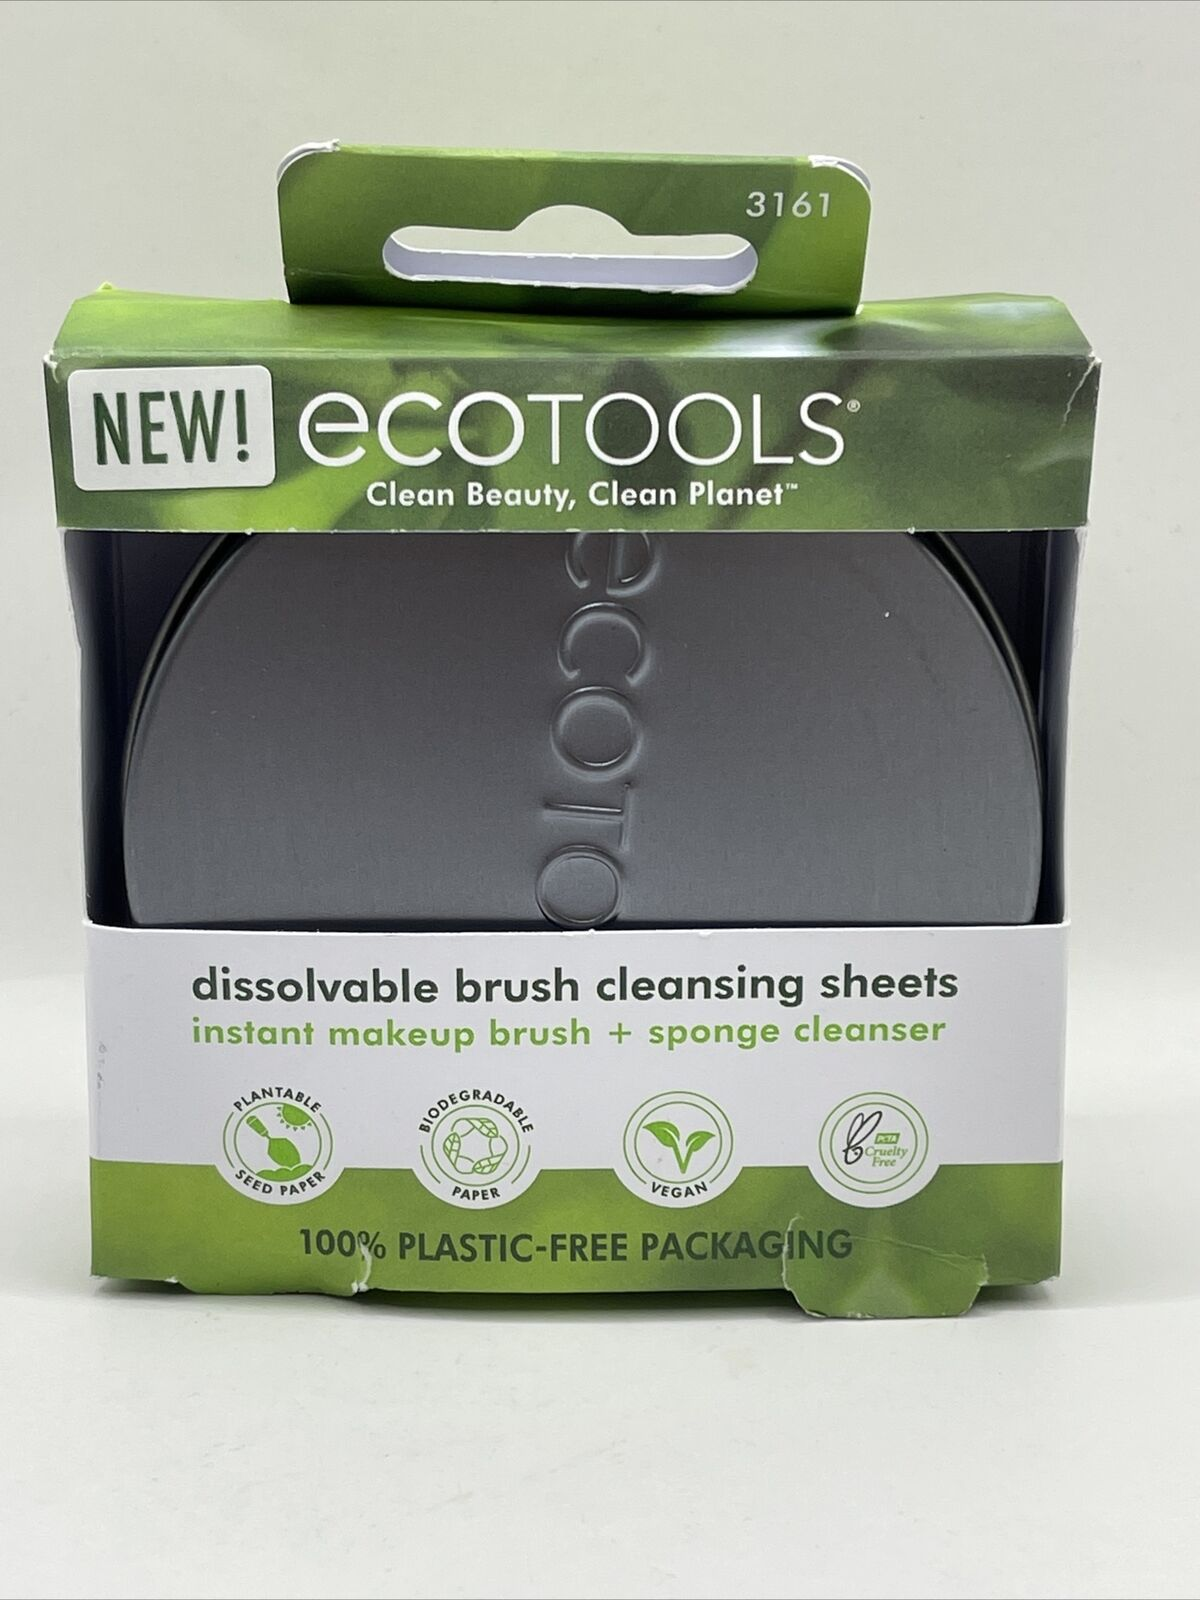 EcoTools Professional Makeup Brush Cleaner and Beauty Blender Dissolving Sheets